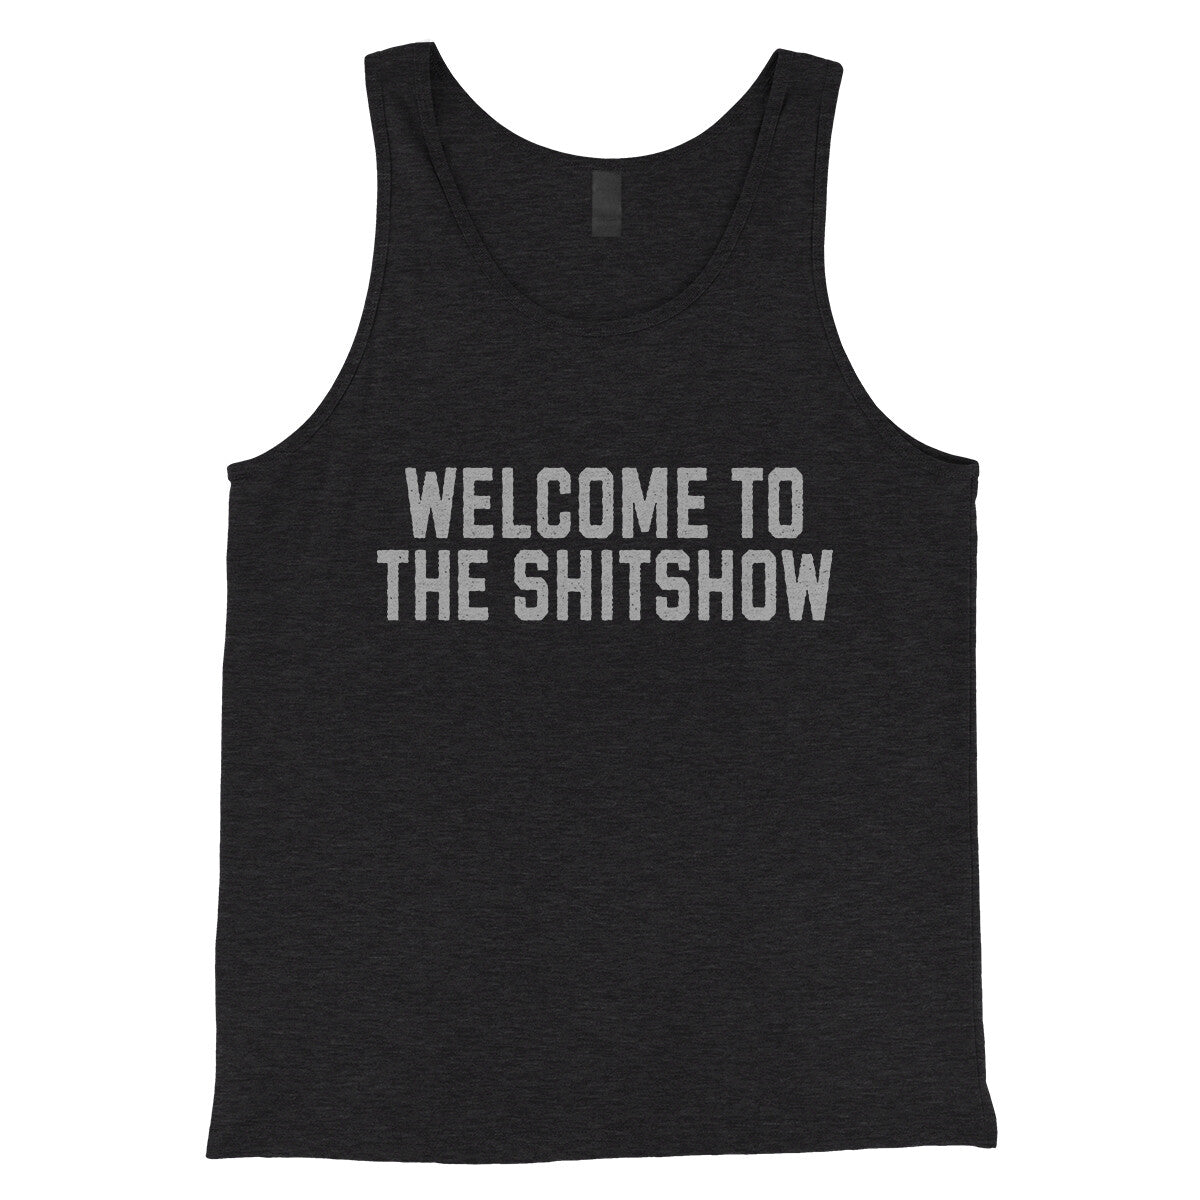 Welcome to the Shit Show in Charcoal Black TriBlend Color